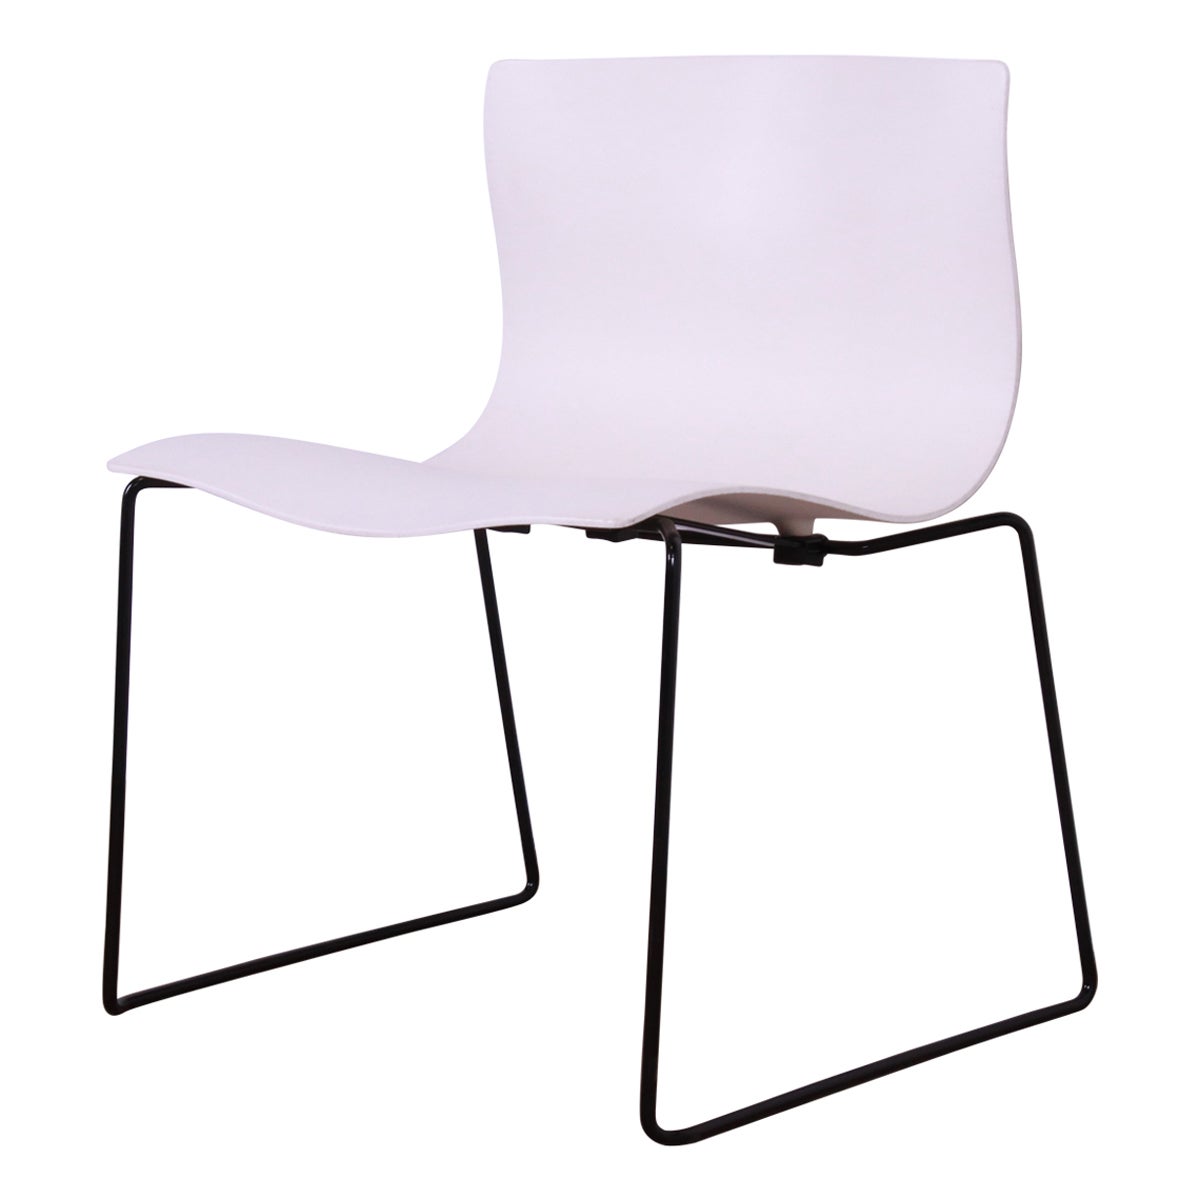 Massimo Vignelli for Knoll Postmodern Handkerchief Chair, 35 Available